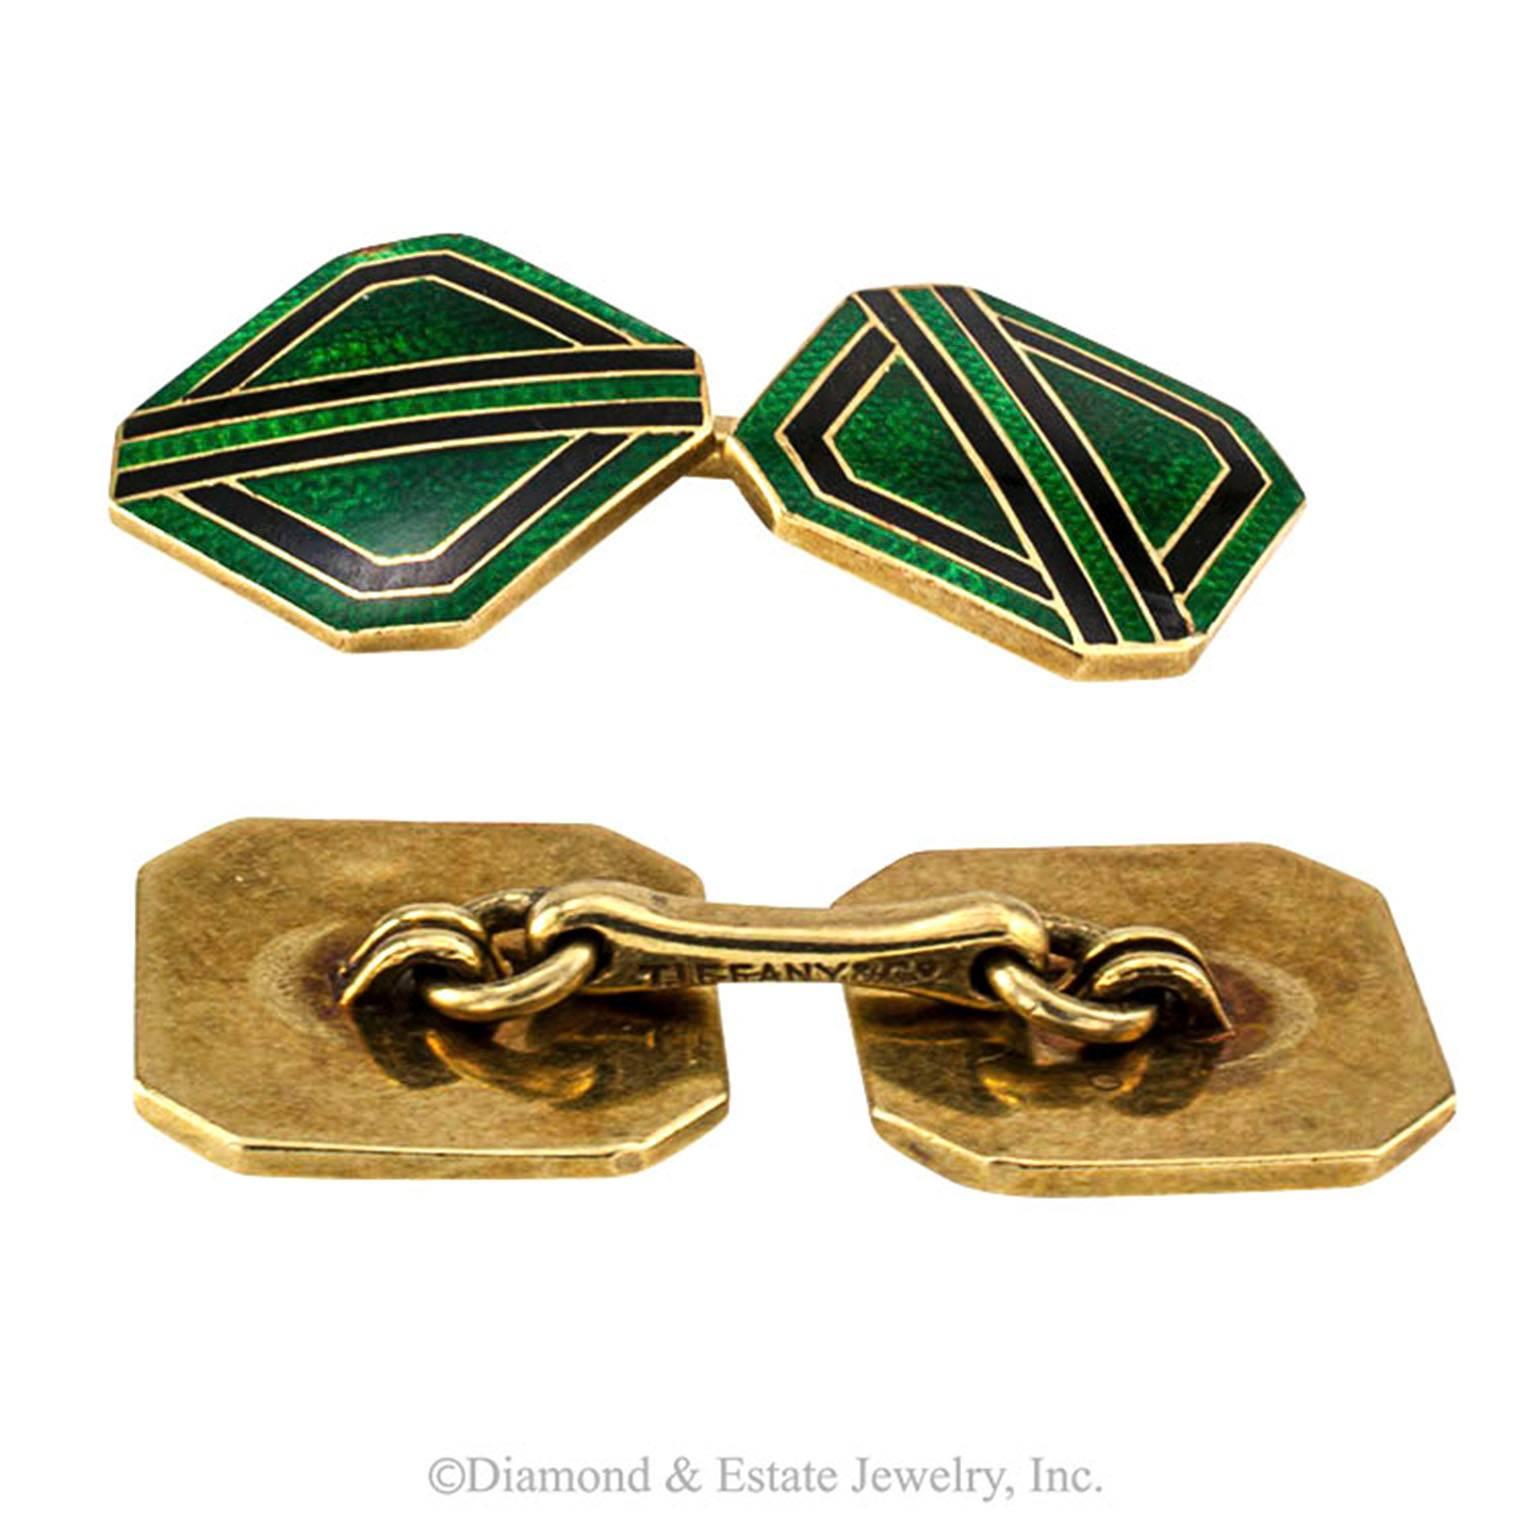 Tiffany and Co. Estate Green and Black Enamel Cufflinks Circa 1930

It is inevitable to overlook the racing-stripe theme that runs through this sporty pair of cuff links... subtle and masculine...at the ready for action and adventure, but always